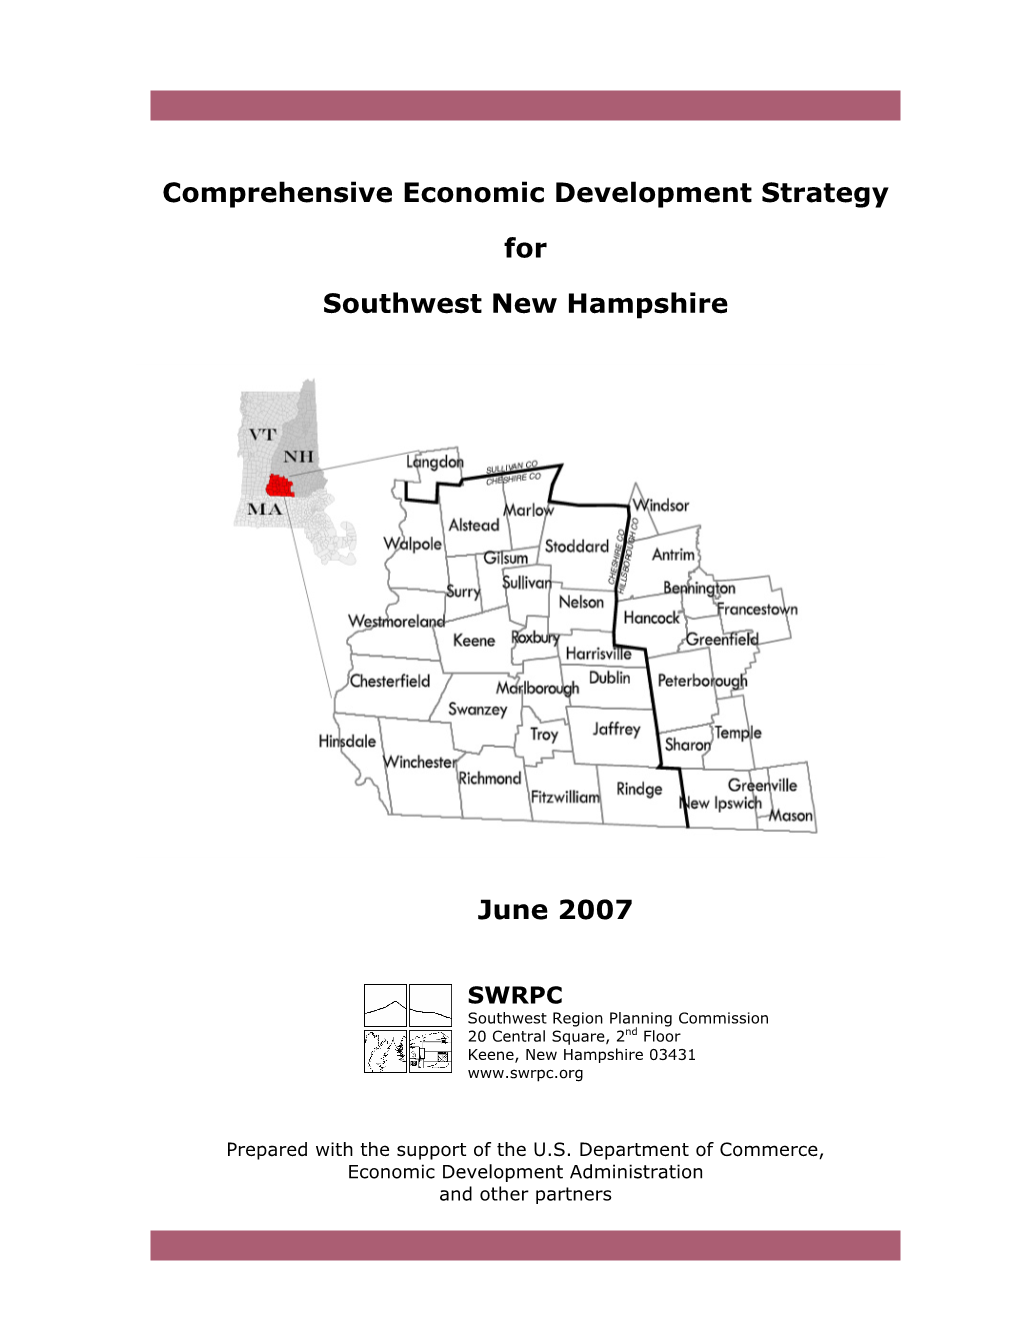 Comprehensive Economic Development Strategy for Southwest New Hampshire Was Funded By